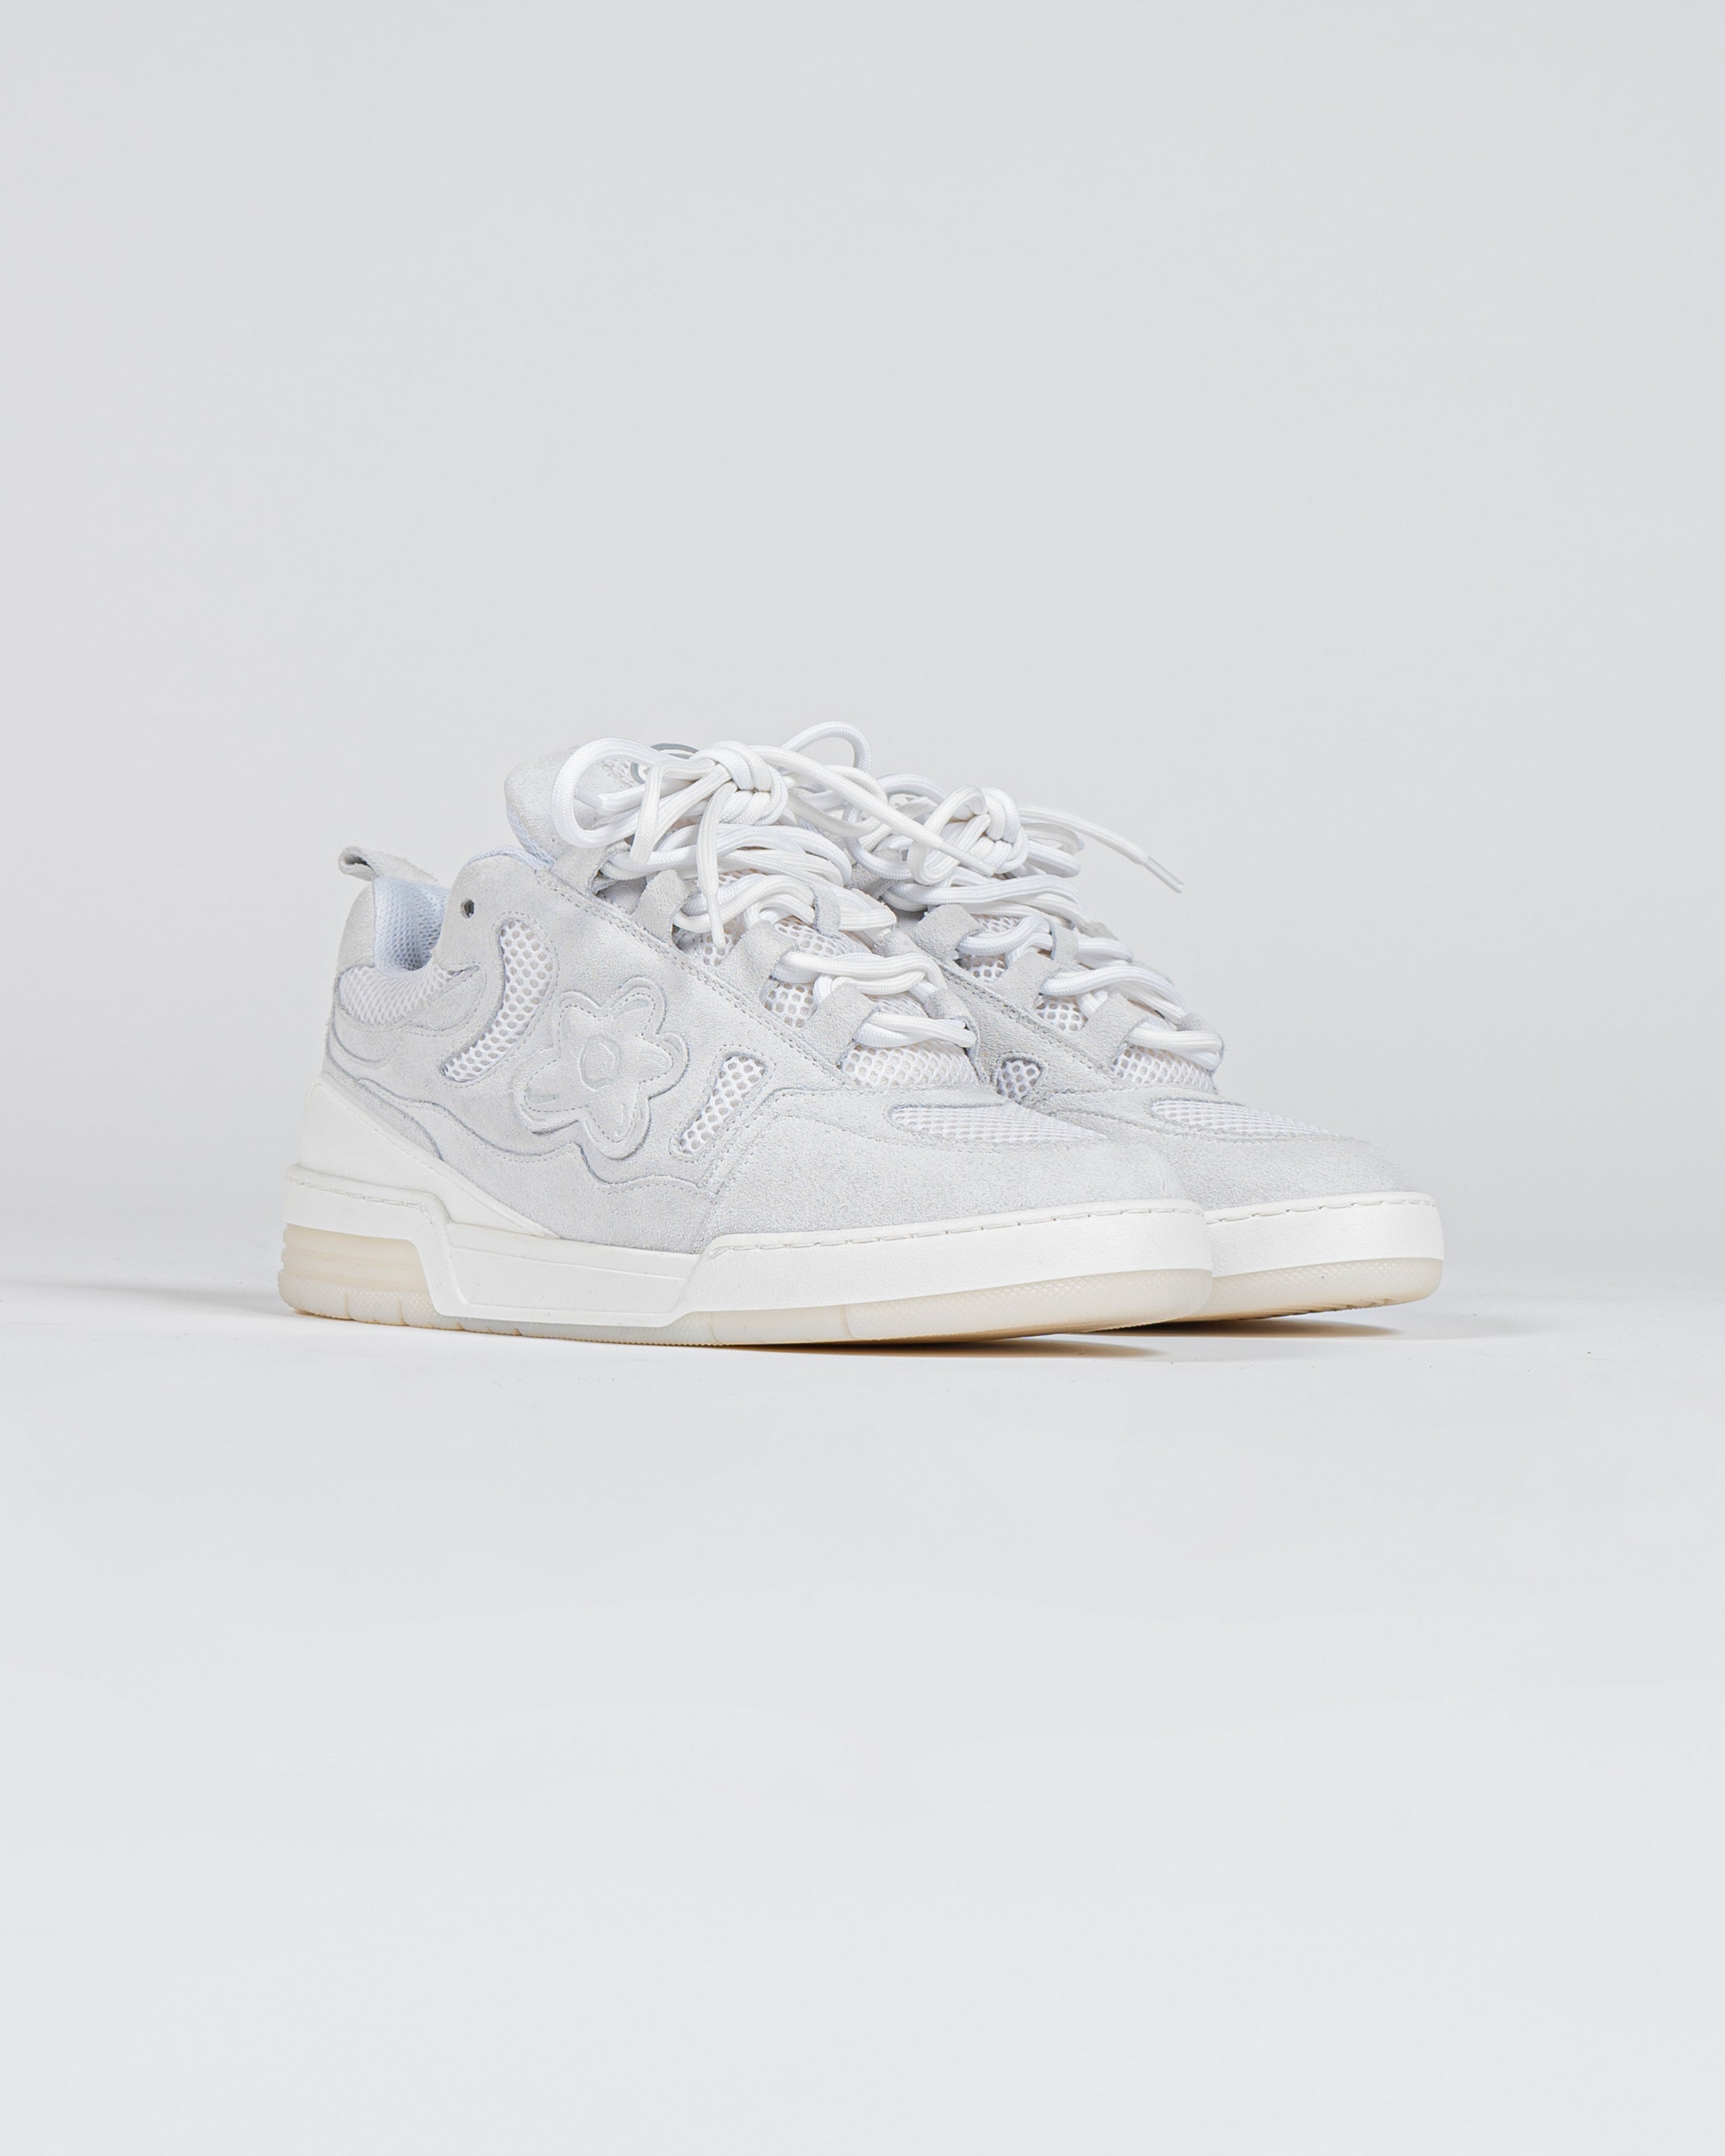 Flower Instincts sneakers white 